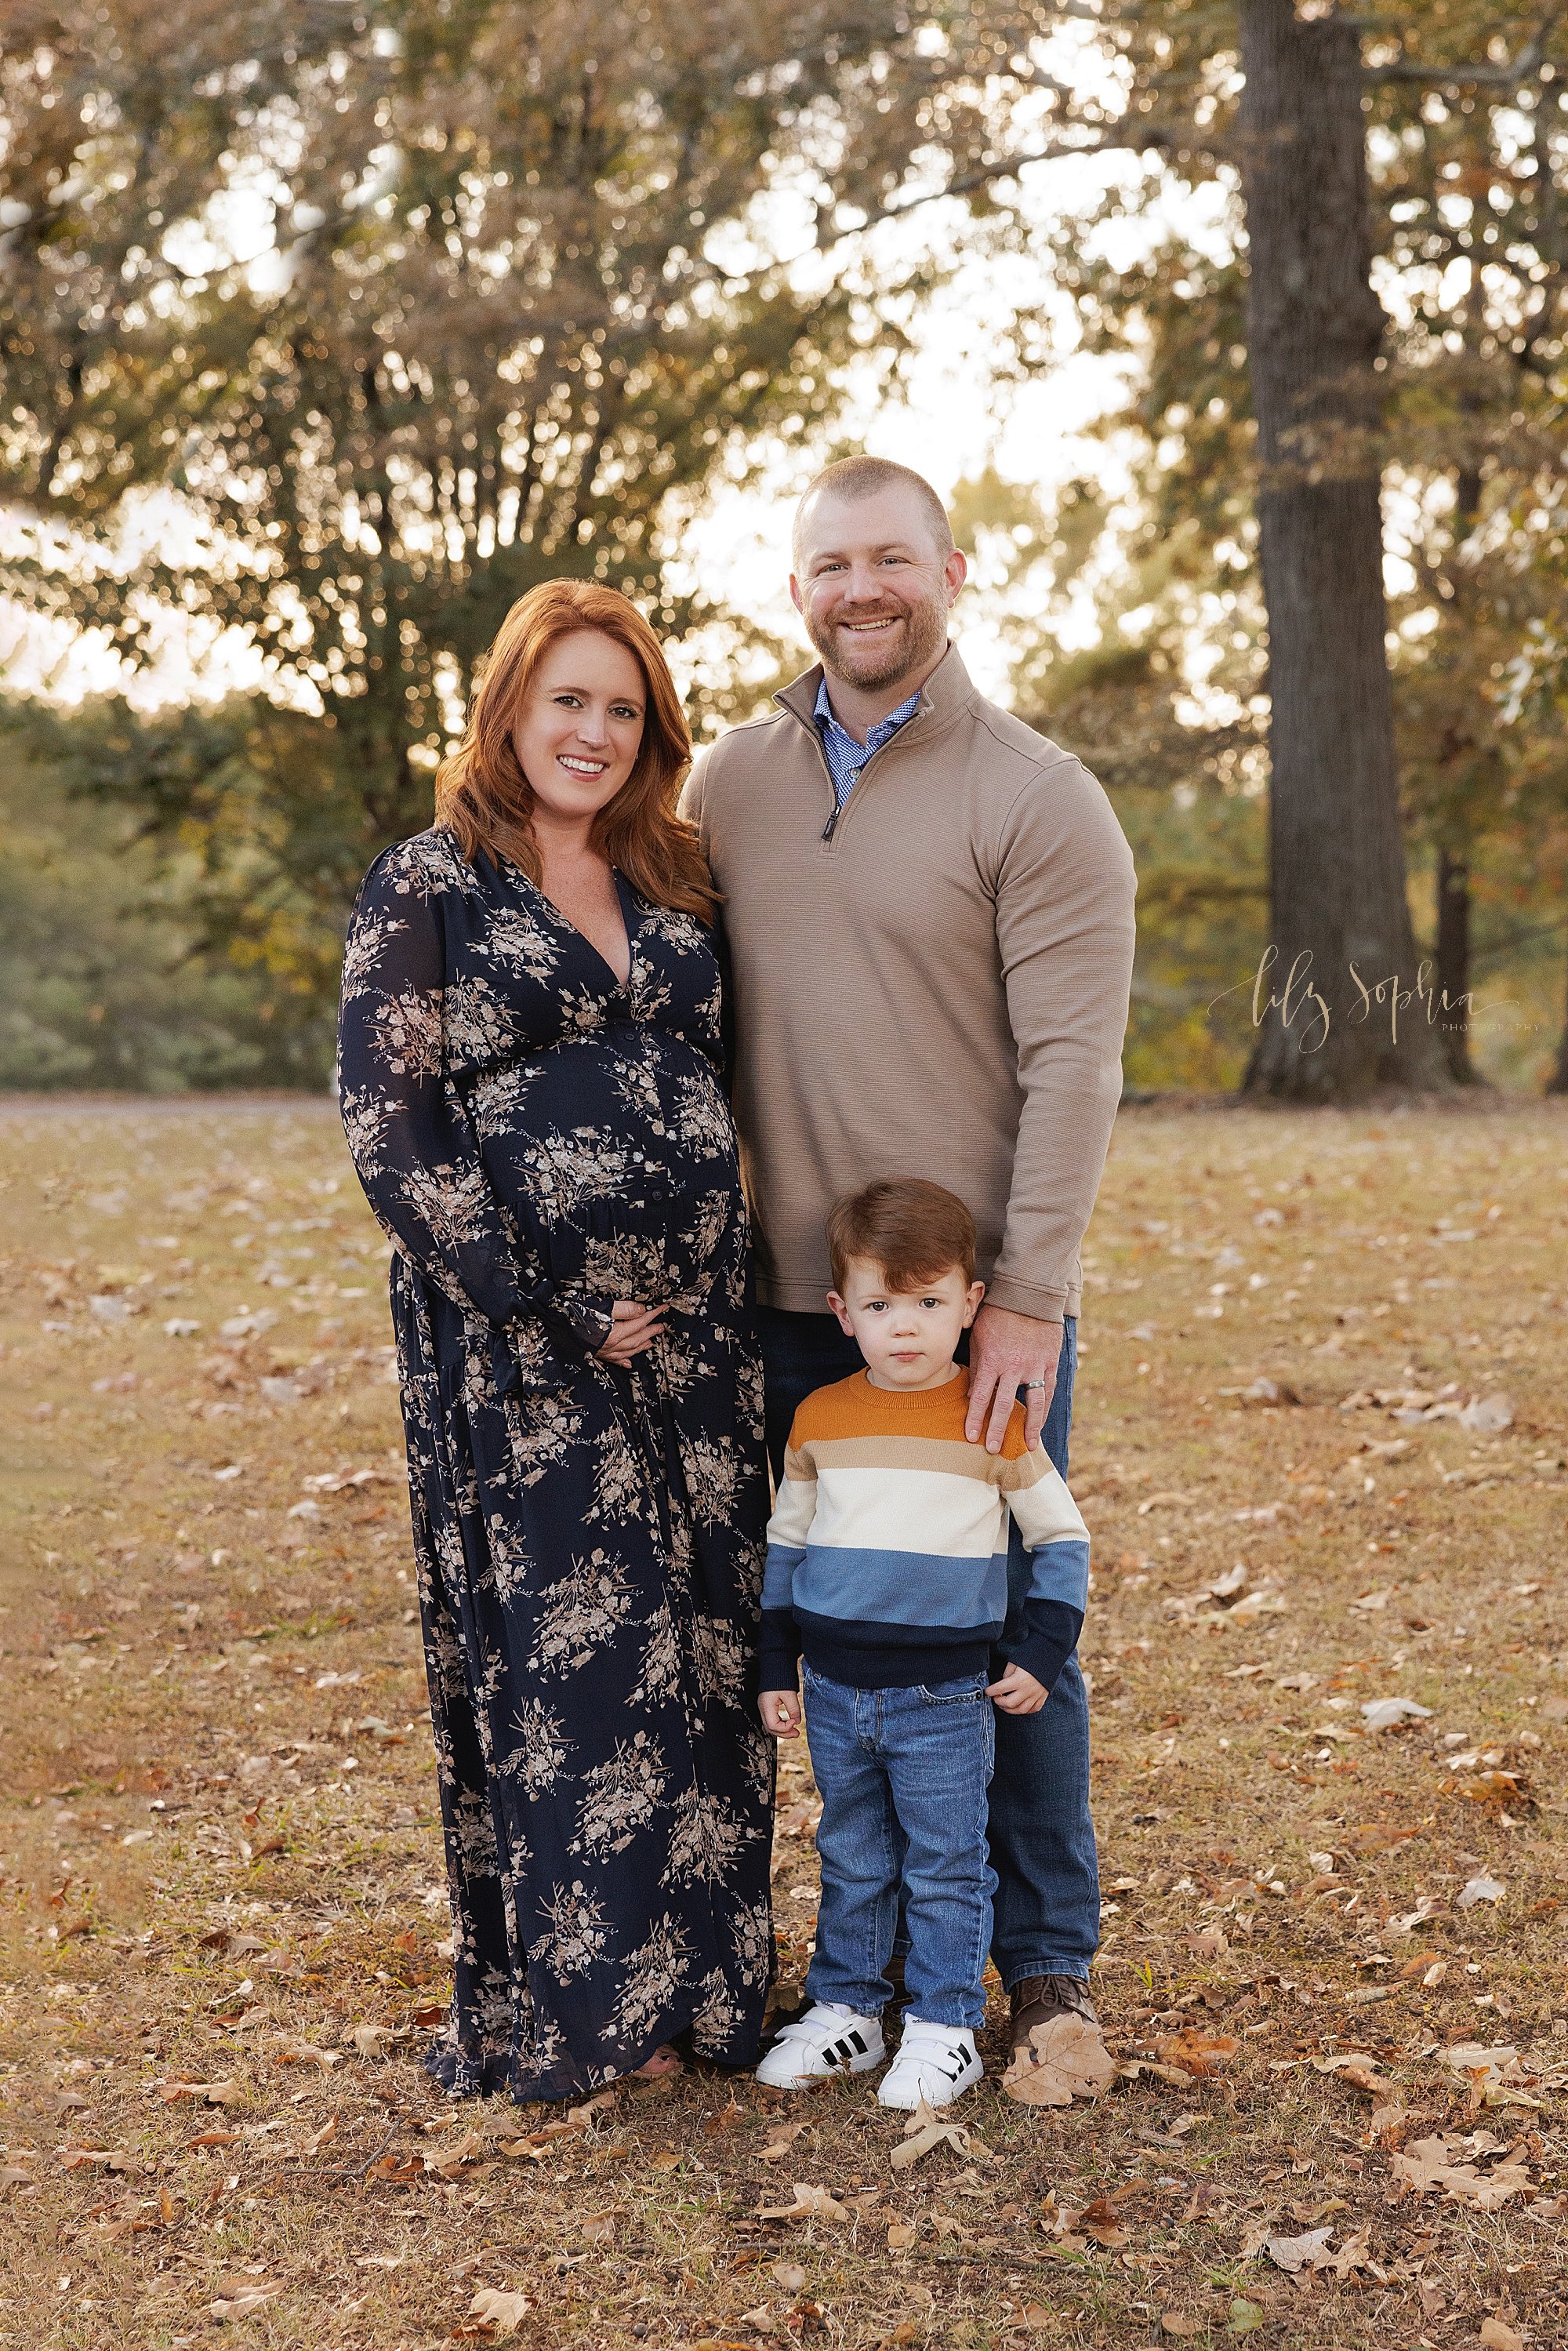 intown-atlanta-decatur-brookhaven-buckhead-outdoor-fall-pictures-family-maternity-photoshoot_5559.jpg